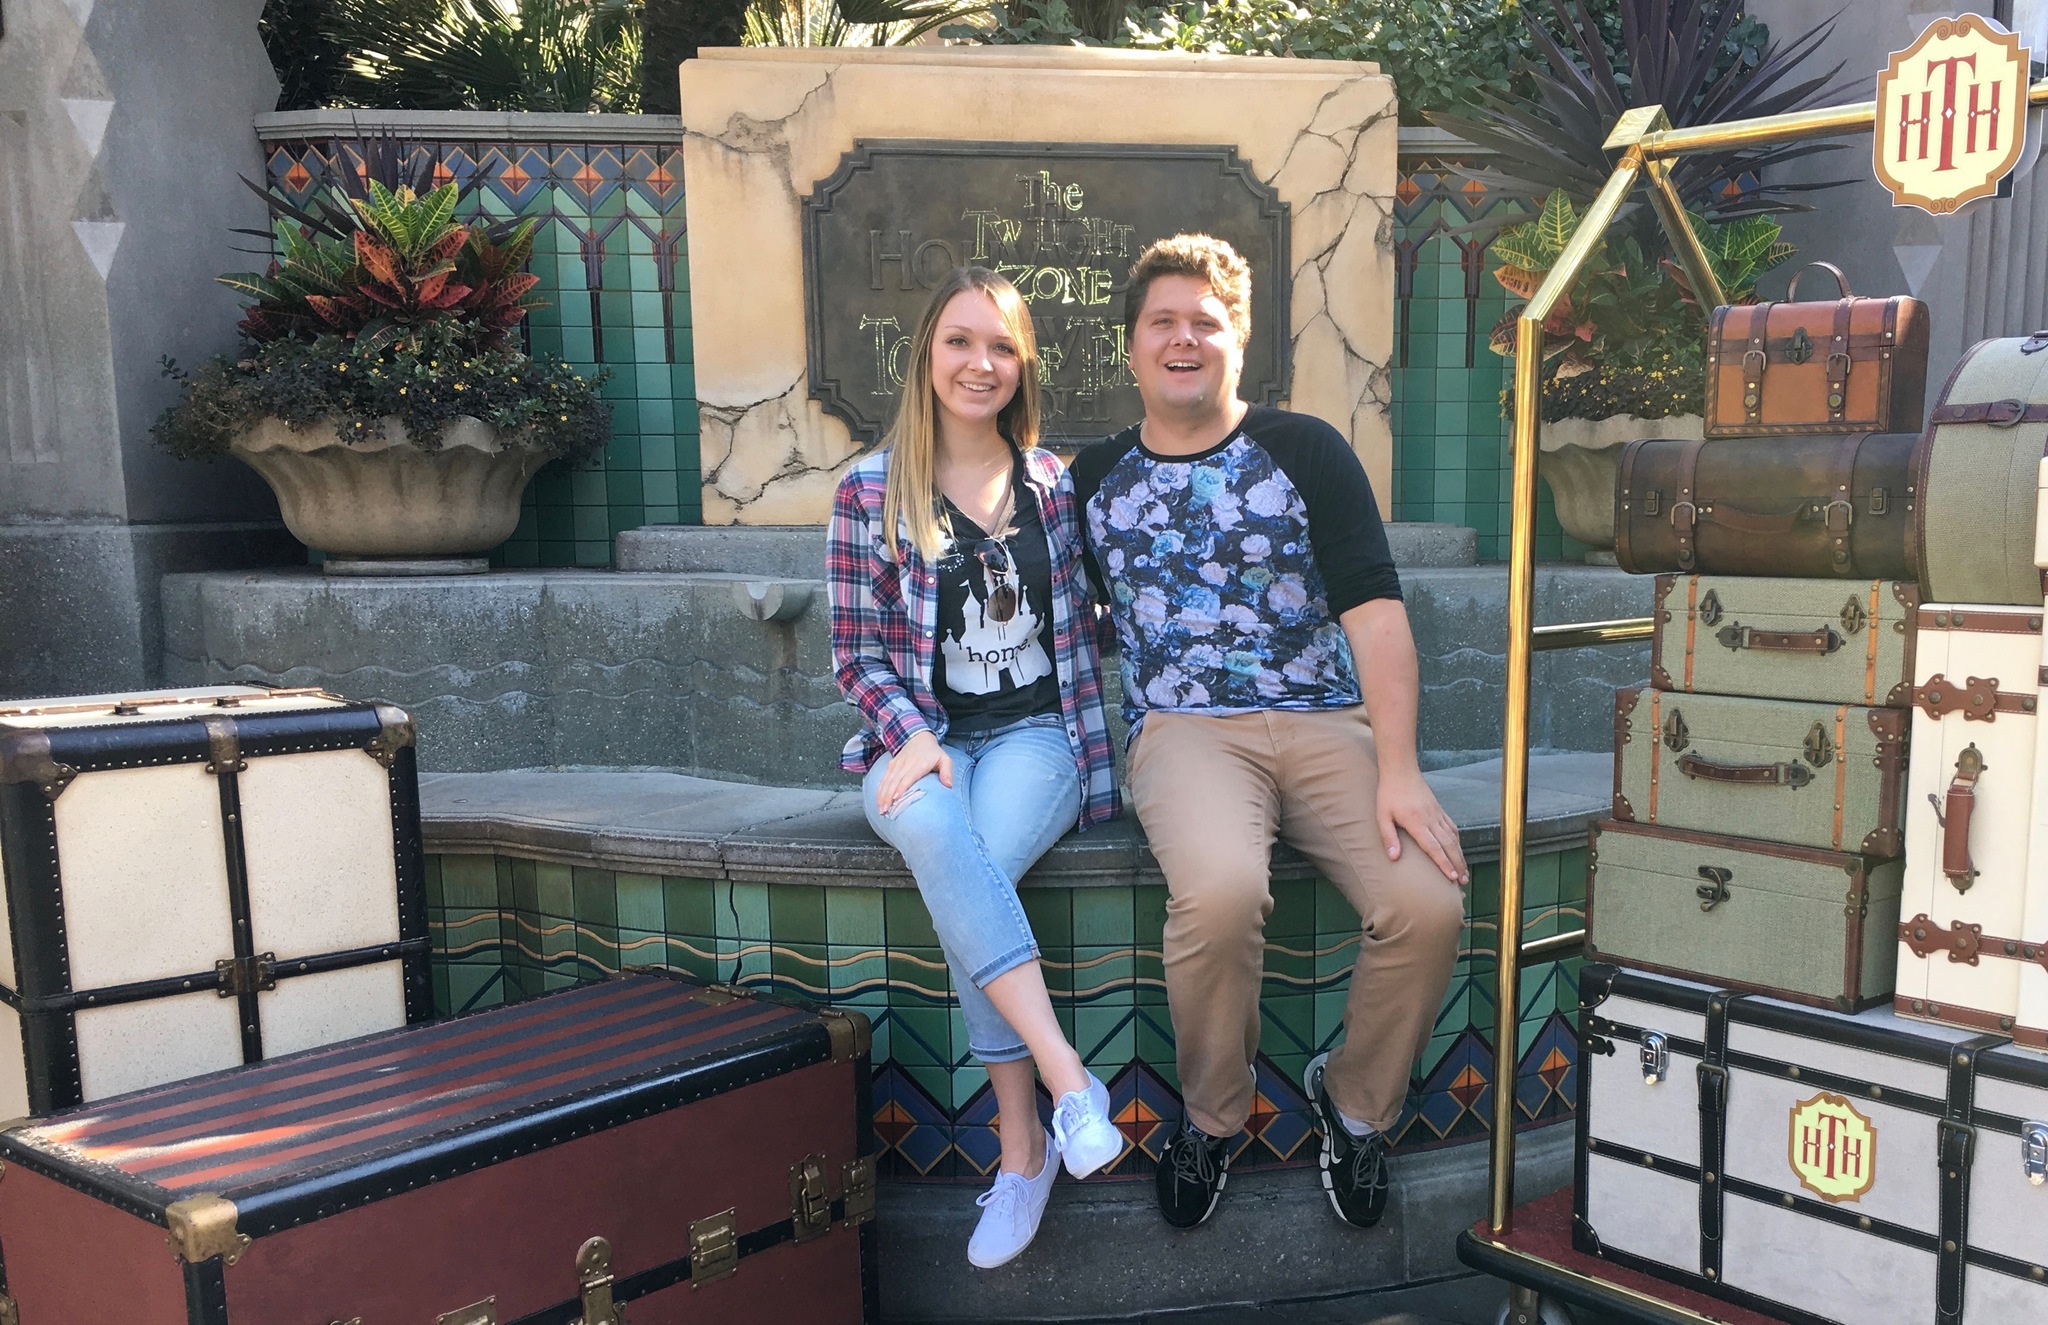 Jessica and brother posing by the Hollywood Tower Hotel at Disneyland